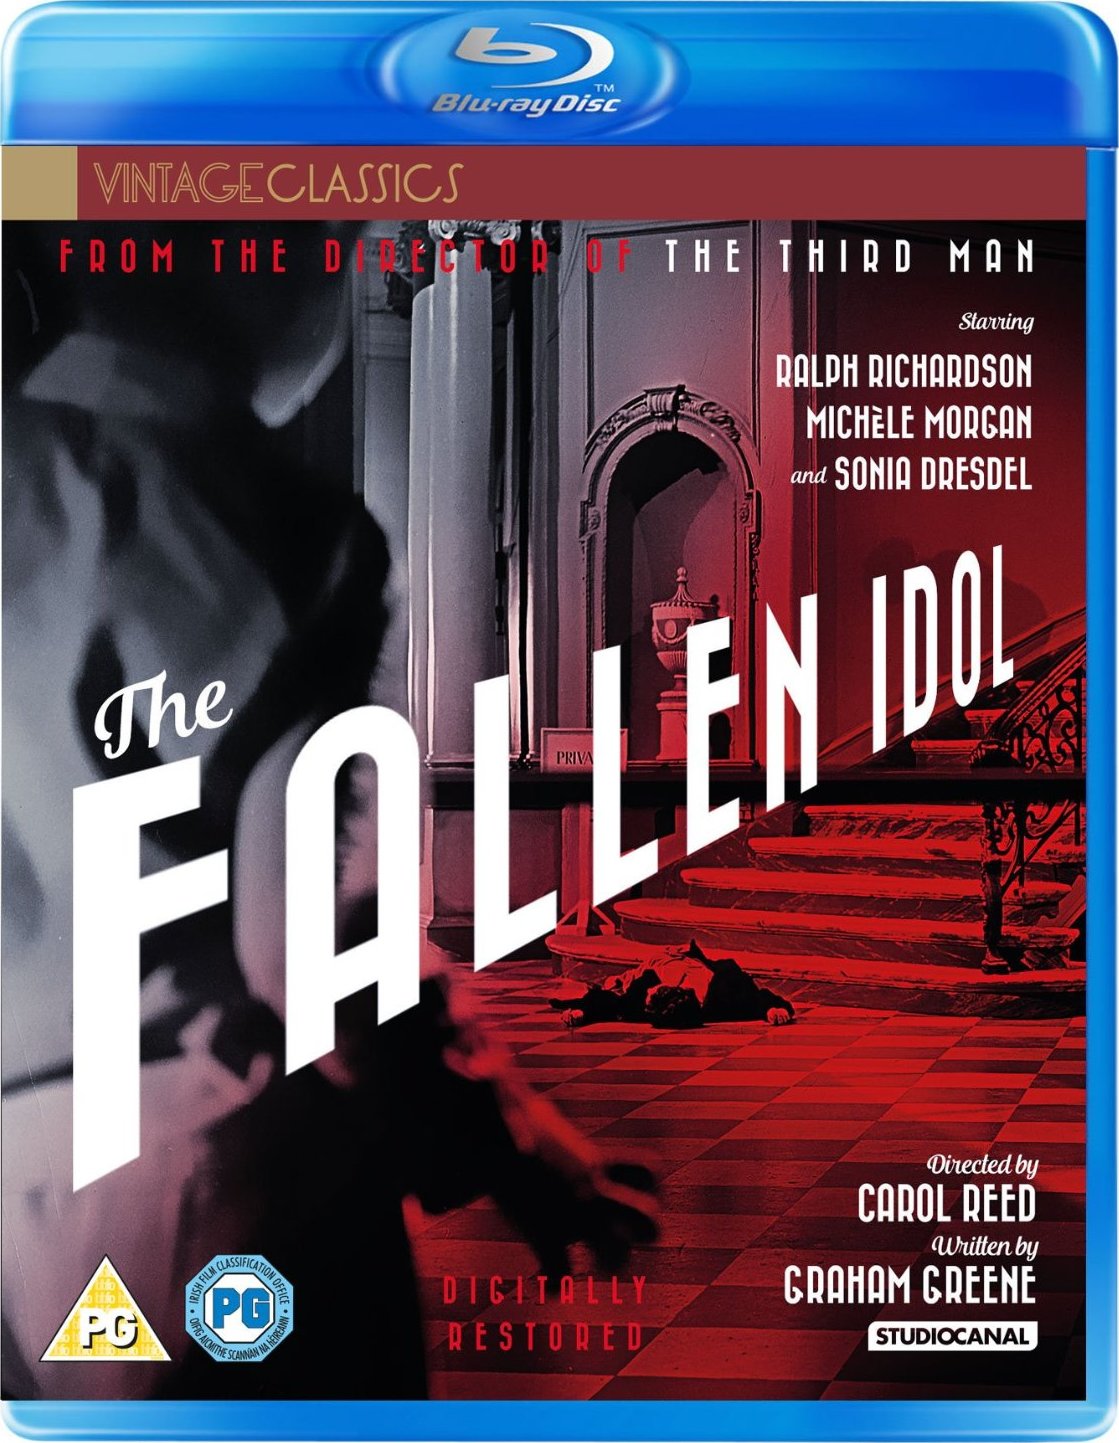 StudioCanal Bluray Releases